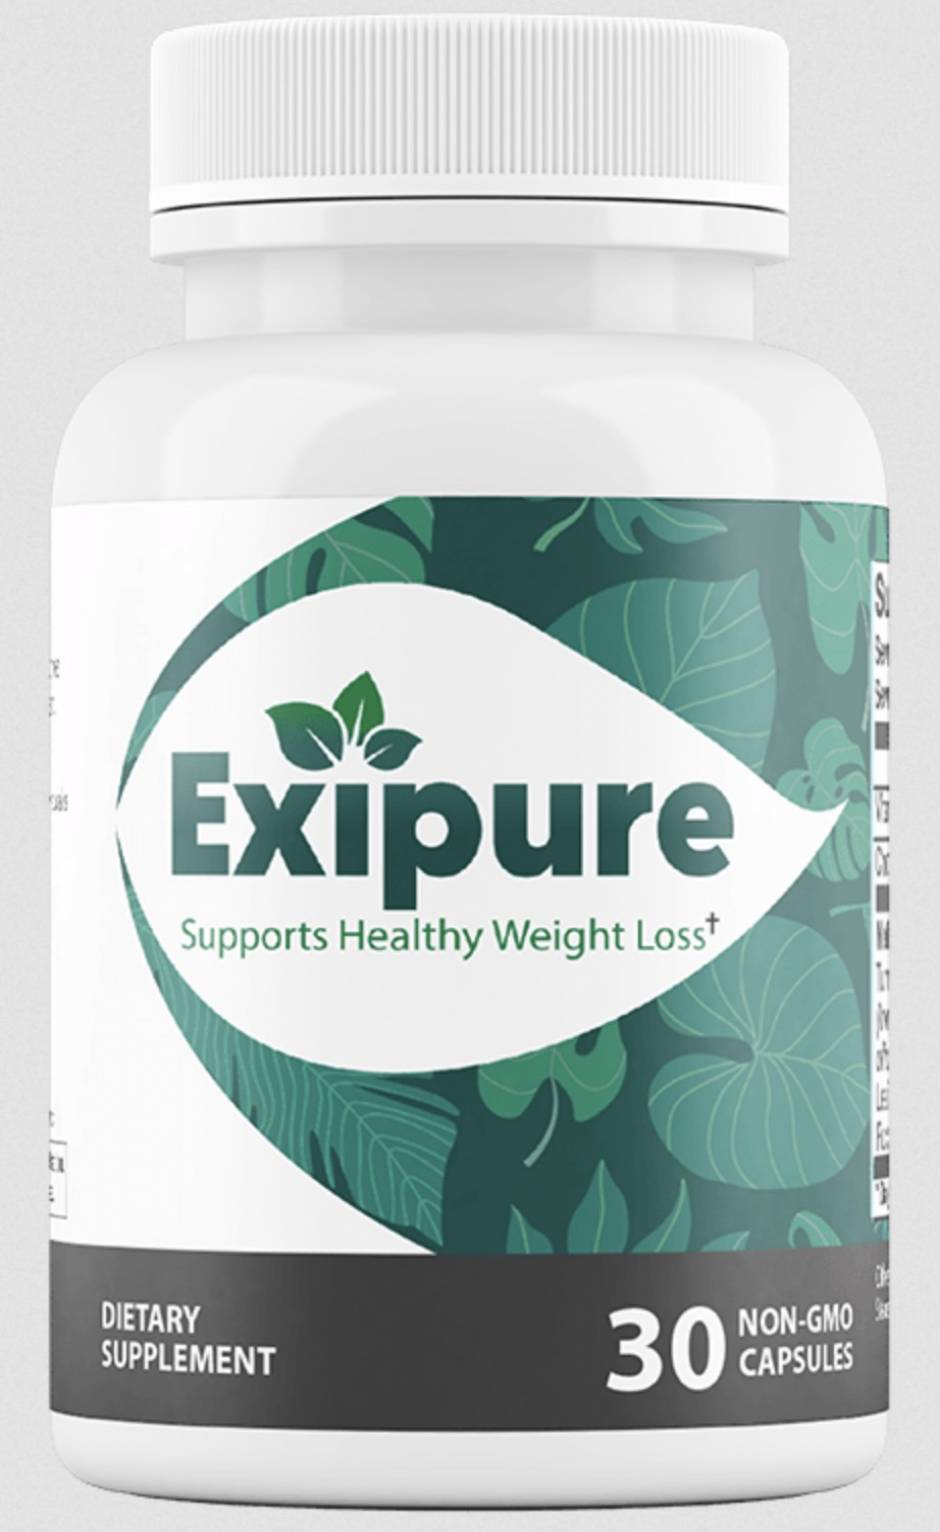 Does Exipure Really Work For Weight Loss